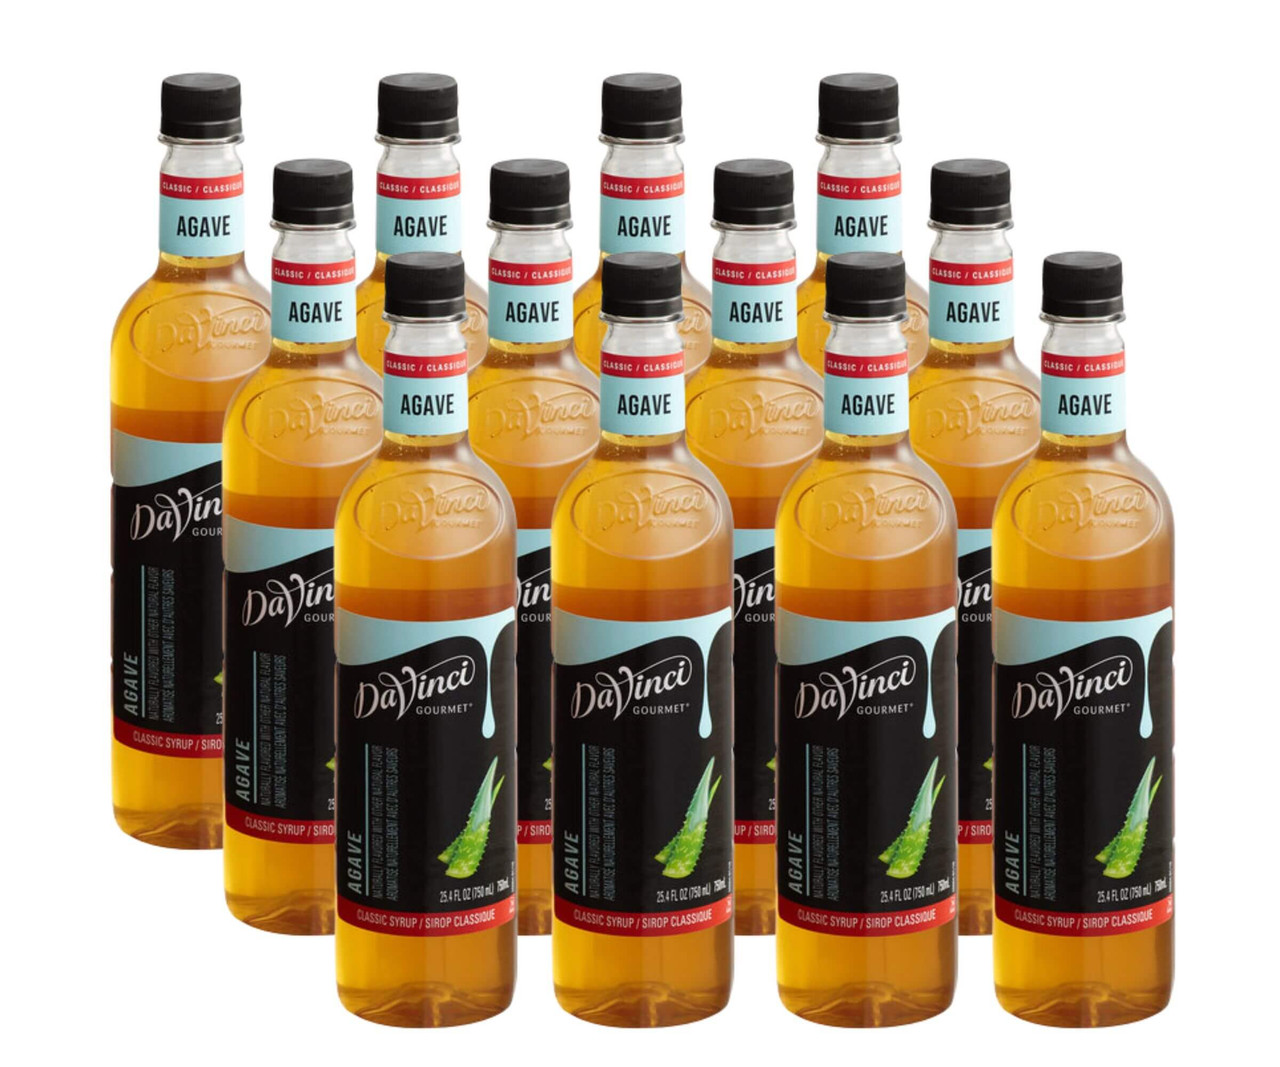 DaVinci Gourmet Classic Agave Flavoring Syrup 750 mL - Pure Cane Sugar - Chicken Pieces